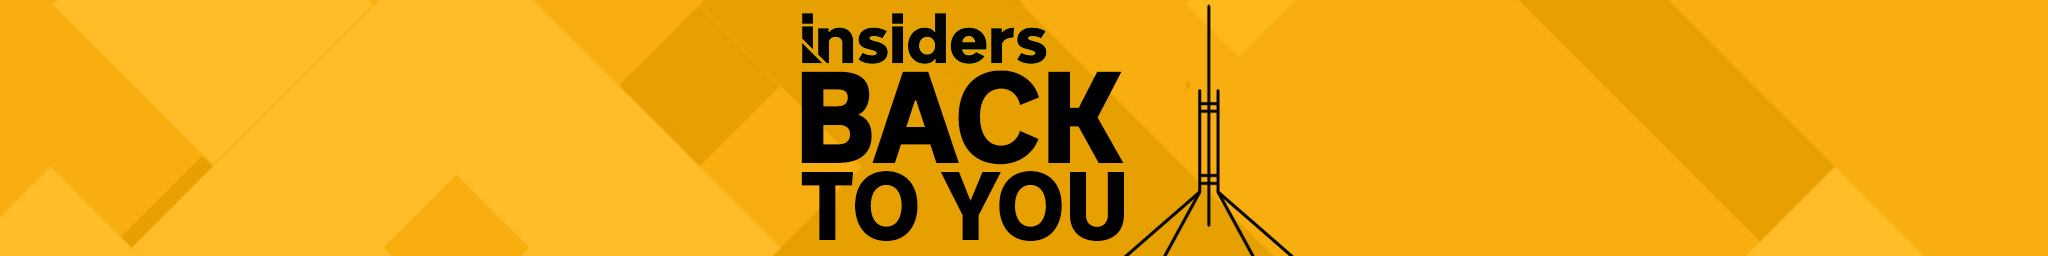 Insiders Back to You